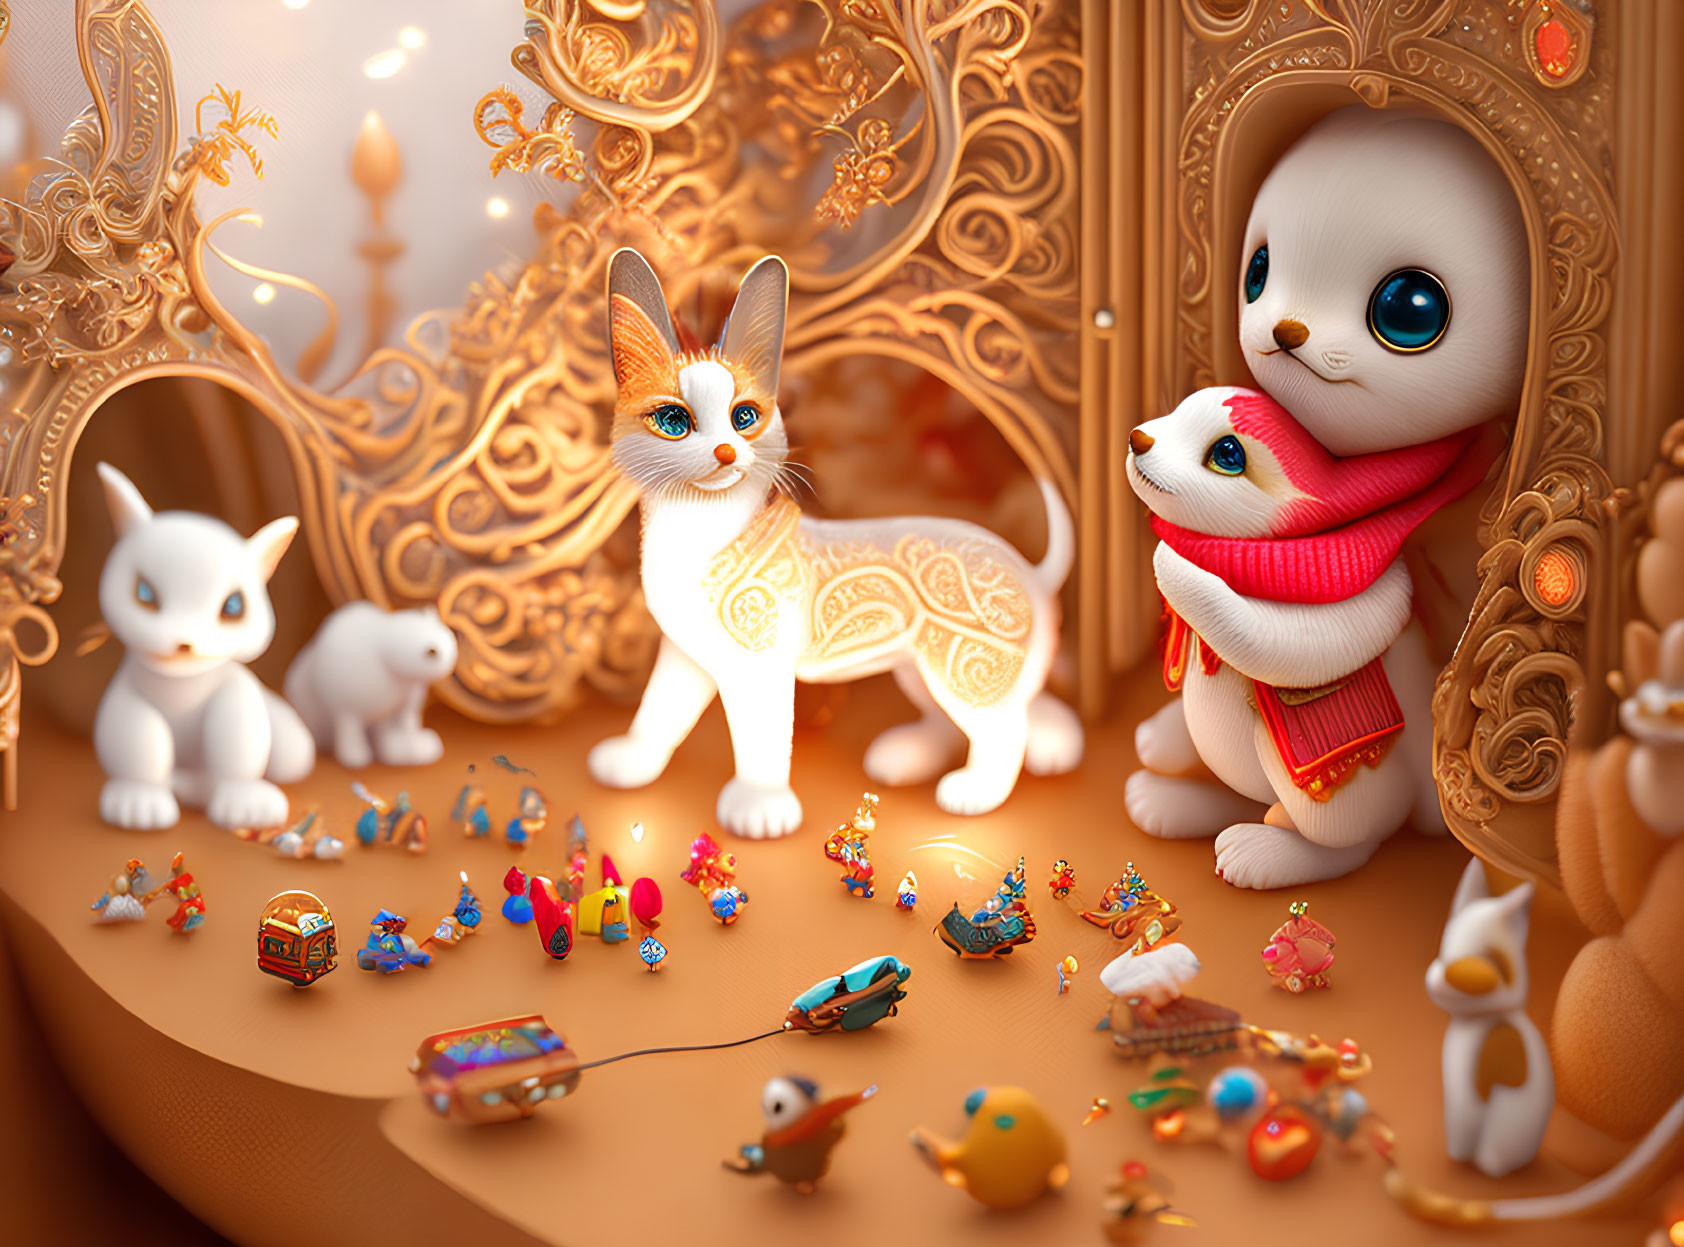 Colorful Creatures in Ornate Setting: Orange Cat, Red Scarfed Rabbit, and Whimsical